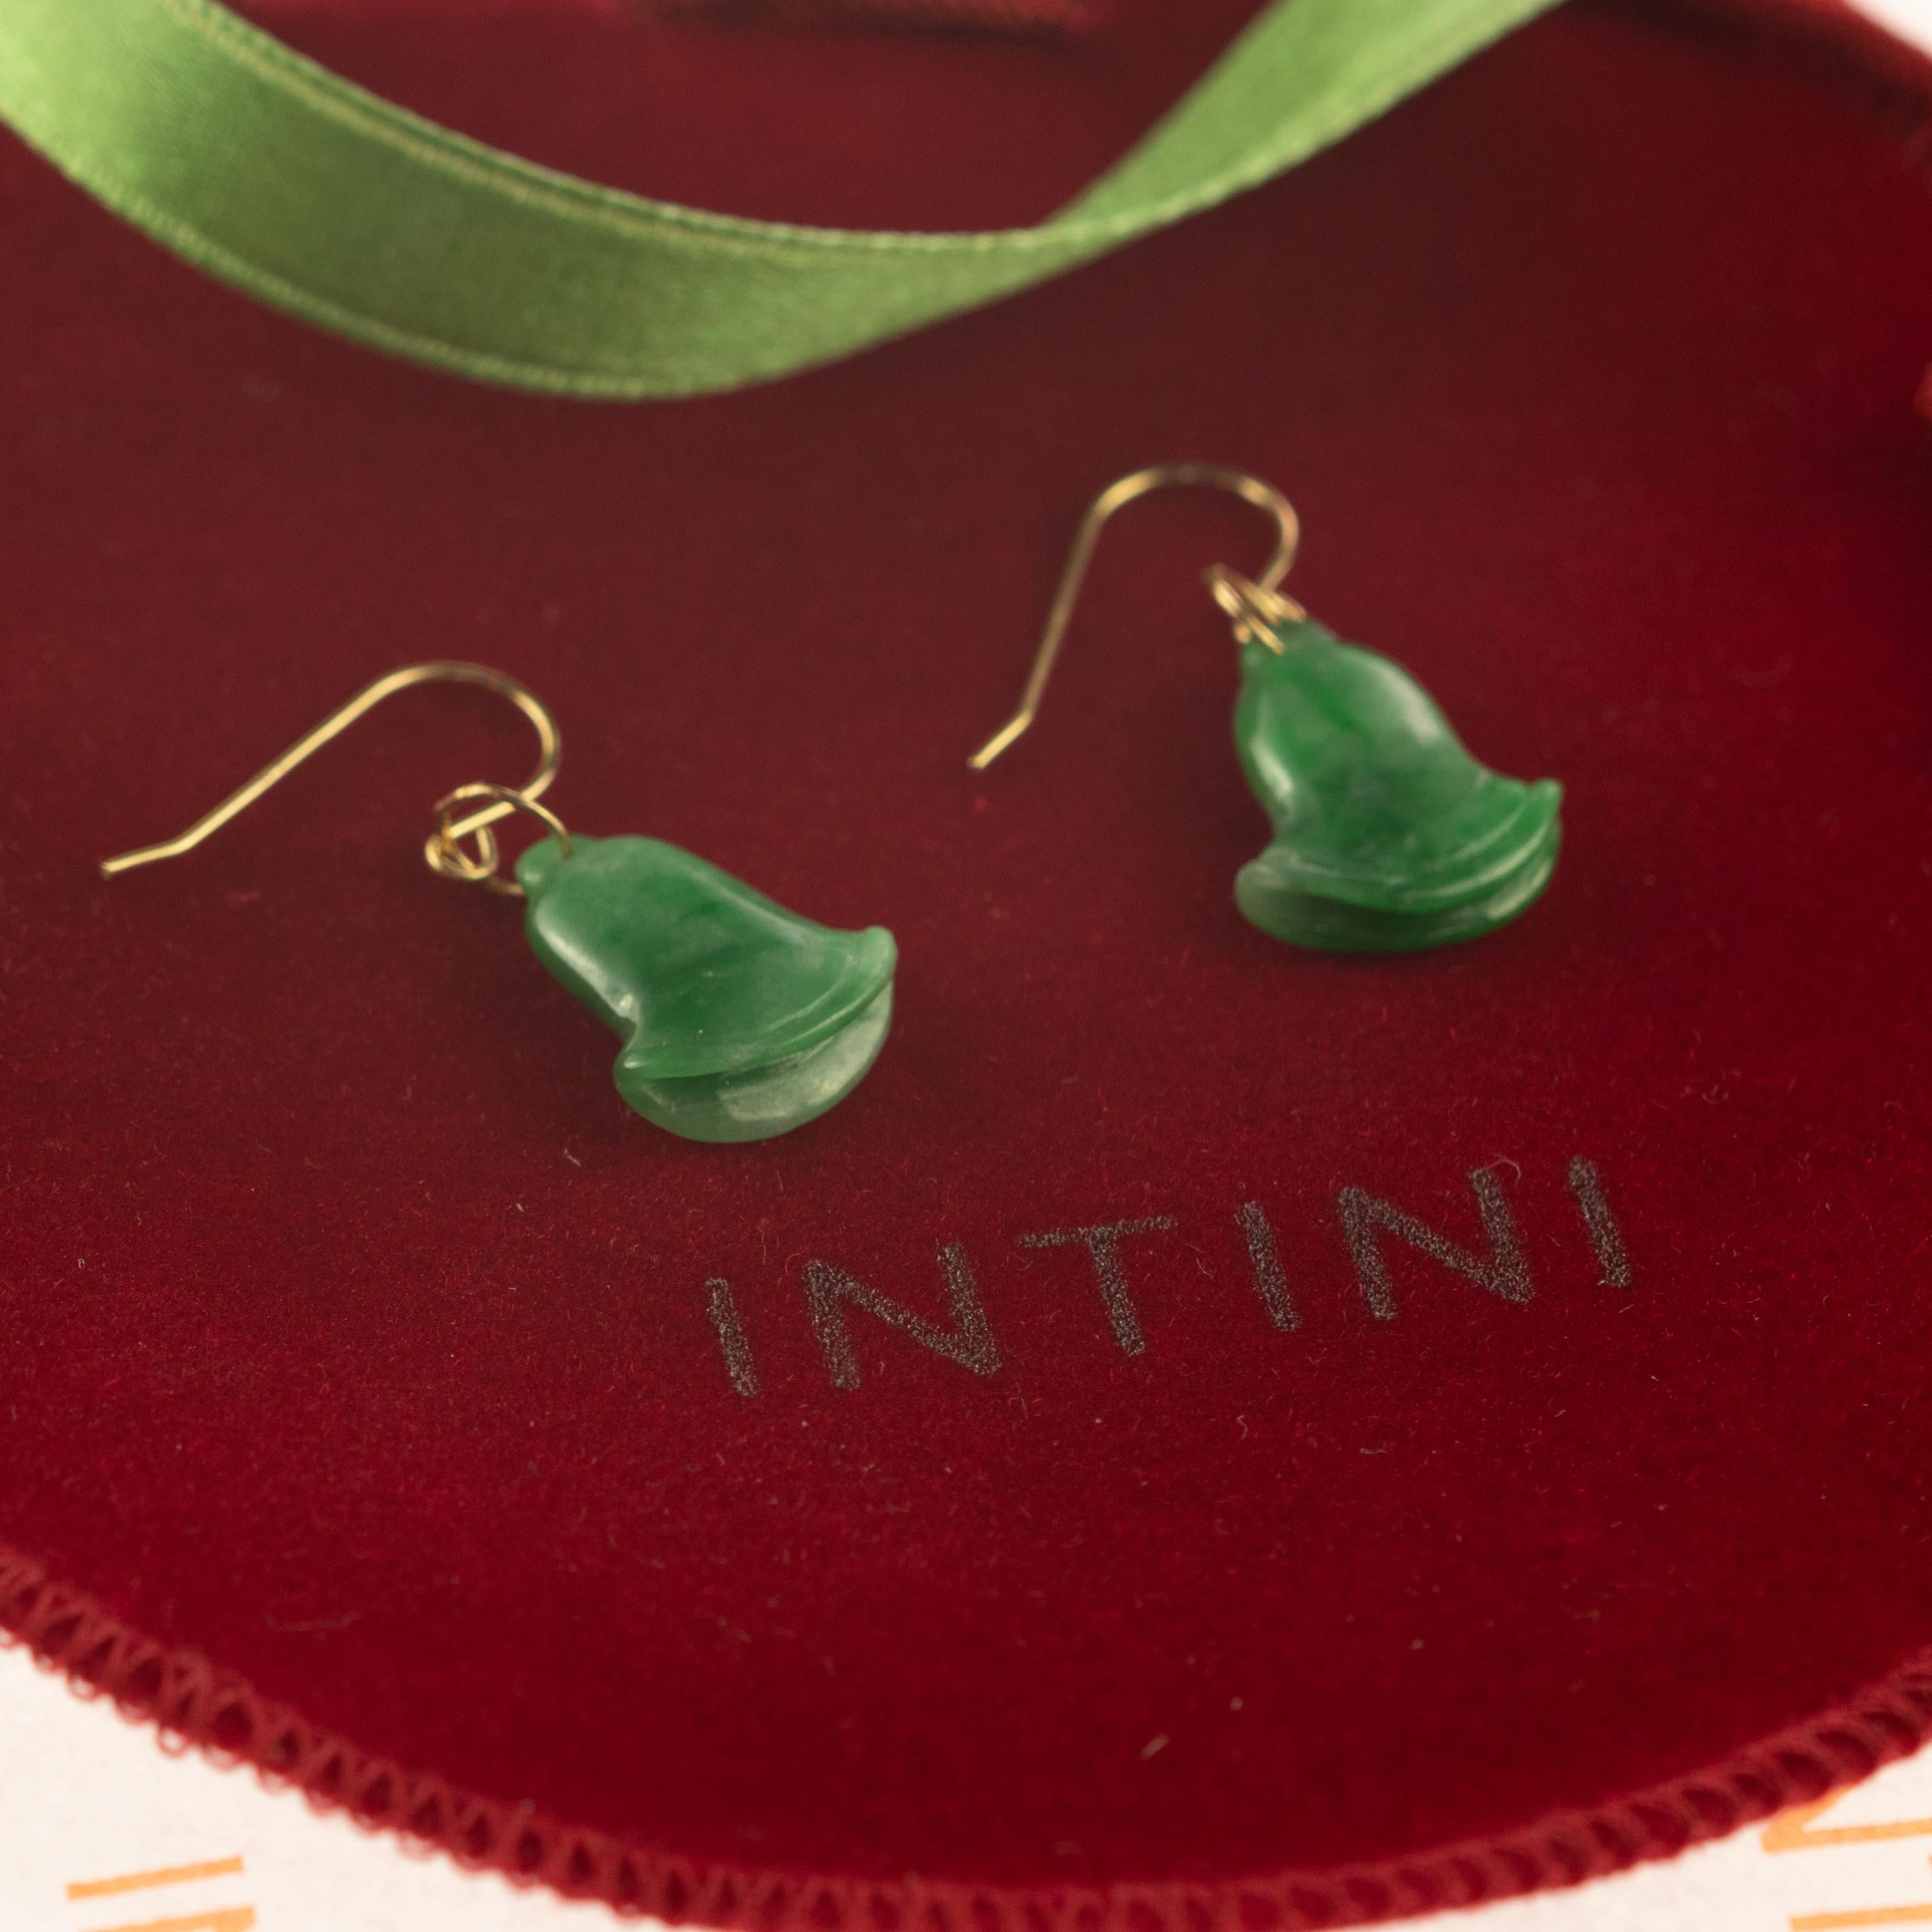 Light weighted green Natural jade bells earrings born in the Intini Jewels workshop. Our designers add all the Italian modern style and glamour in one exquisite piece. Stunning crafted jade gems, hanging from 18 karat yellow gold earwire. Dangle,